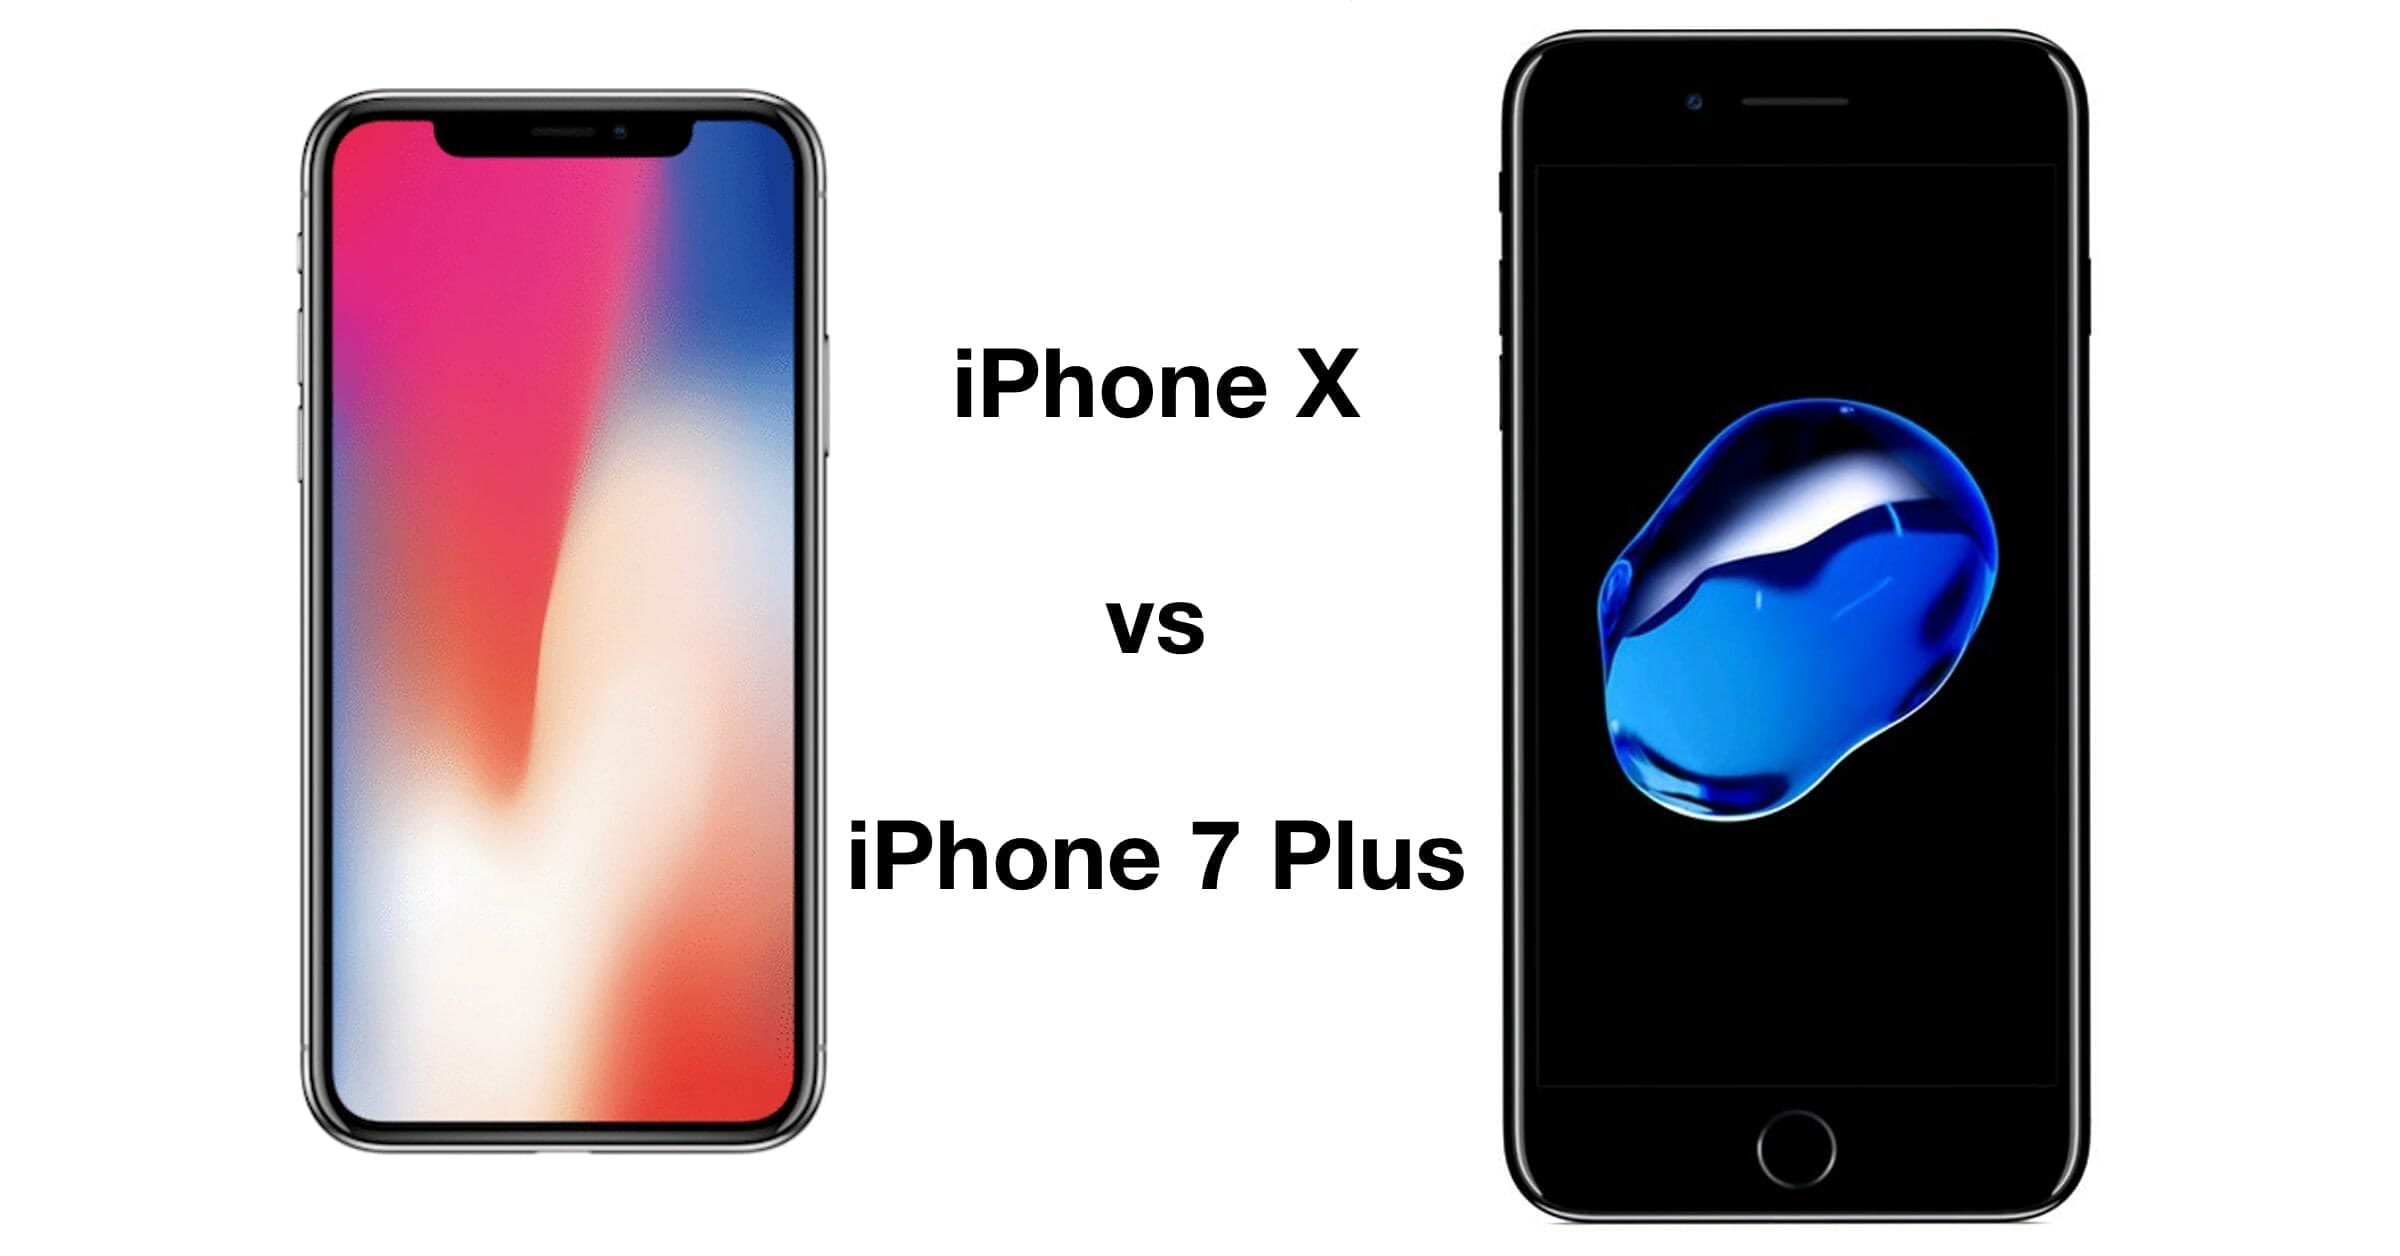 Iphone X Vs Iphone 7 Plus Comparison And In Depth Iphone X Review